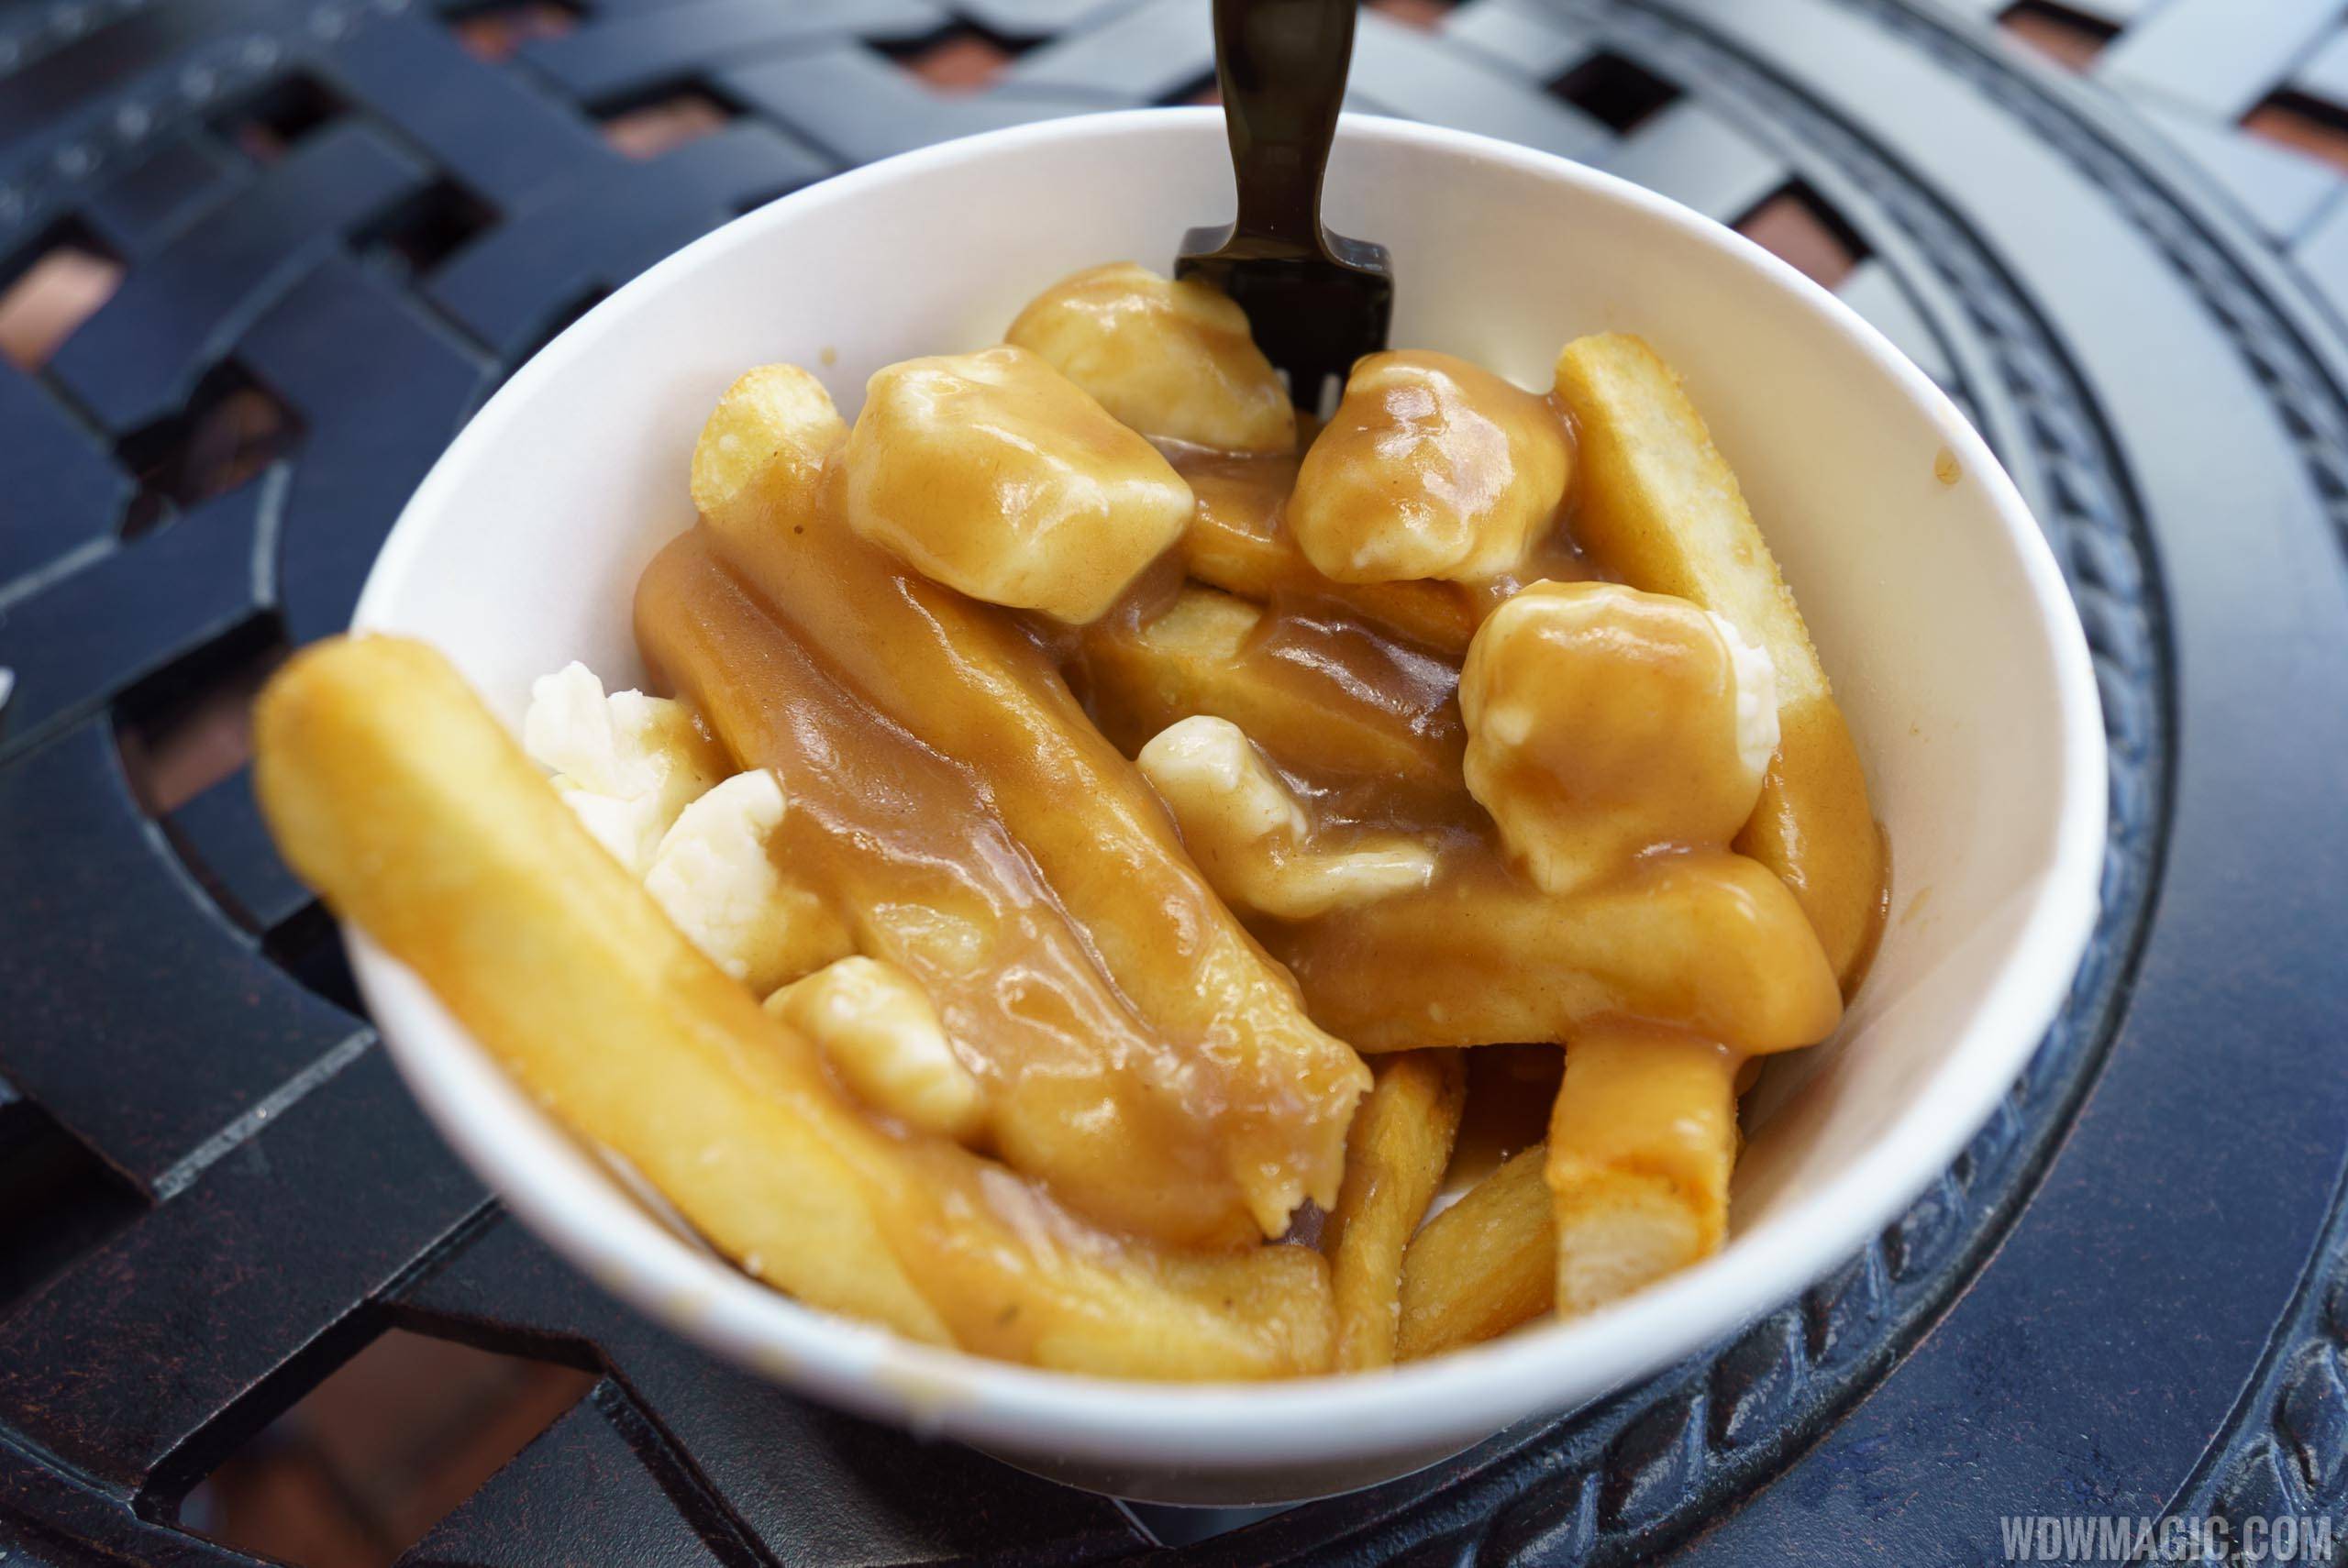 The Daily Poutine overview